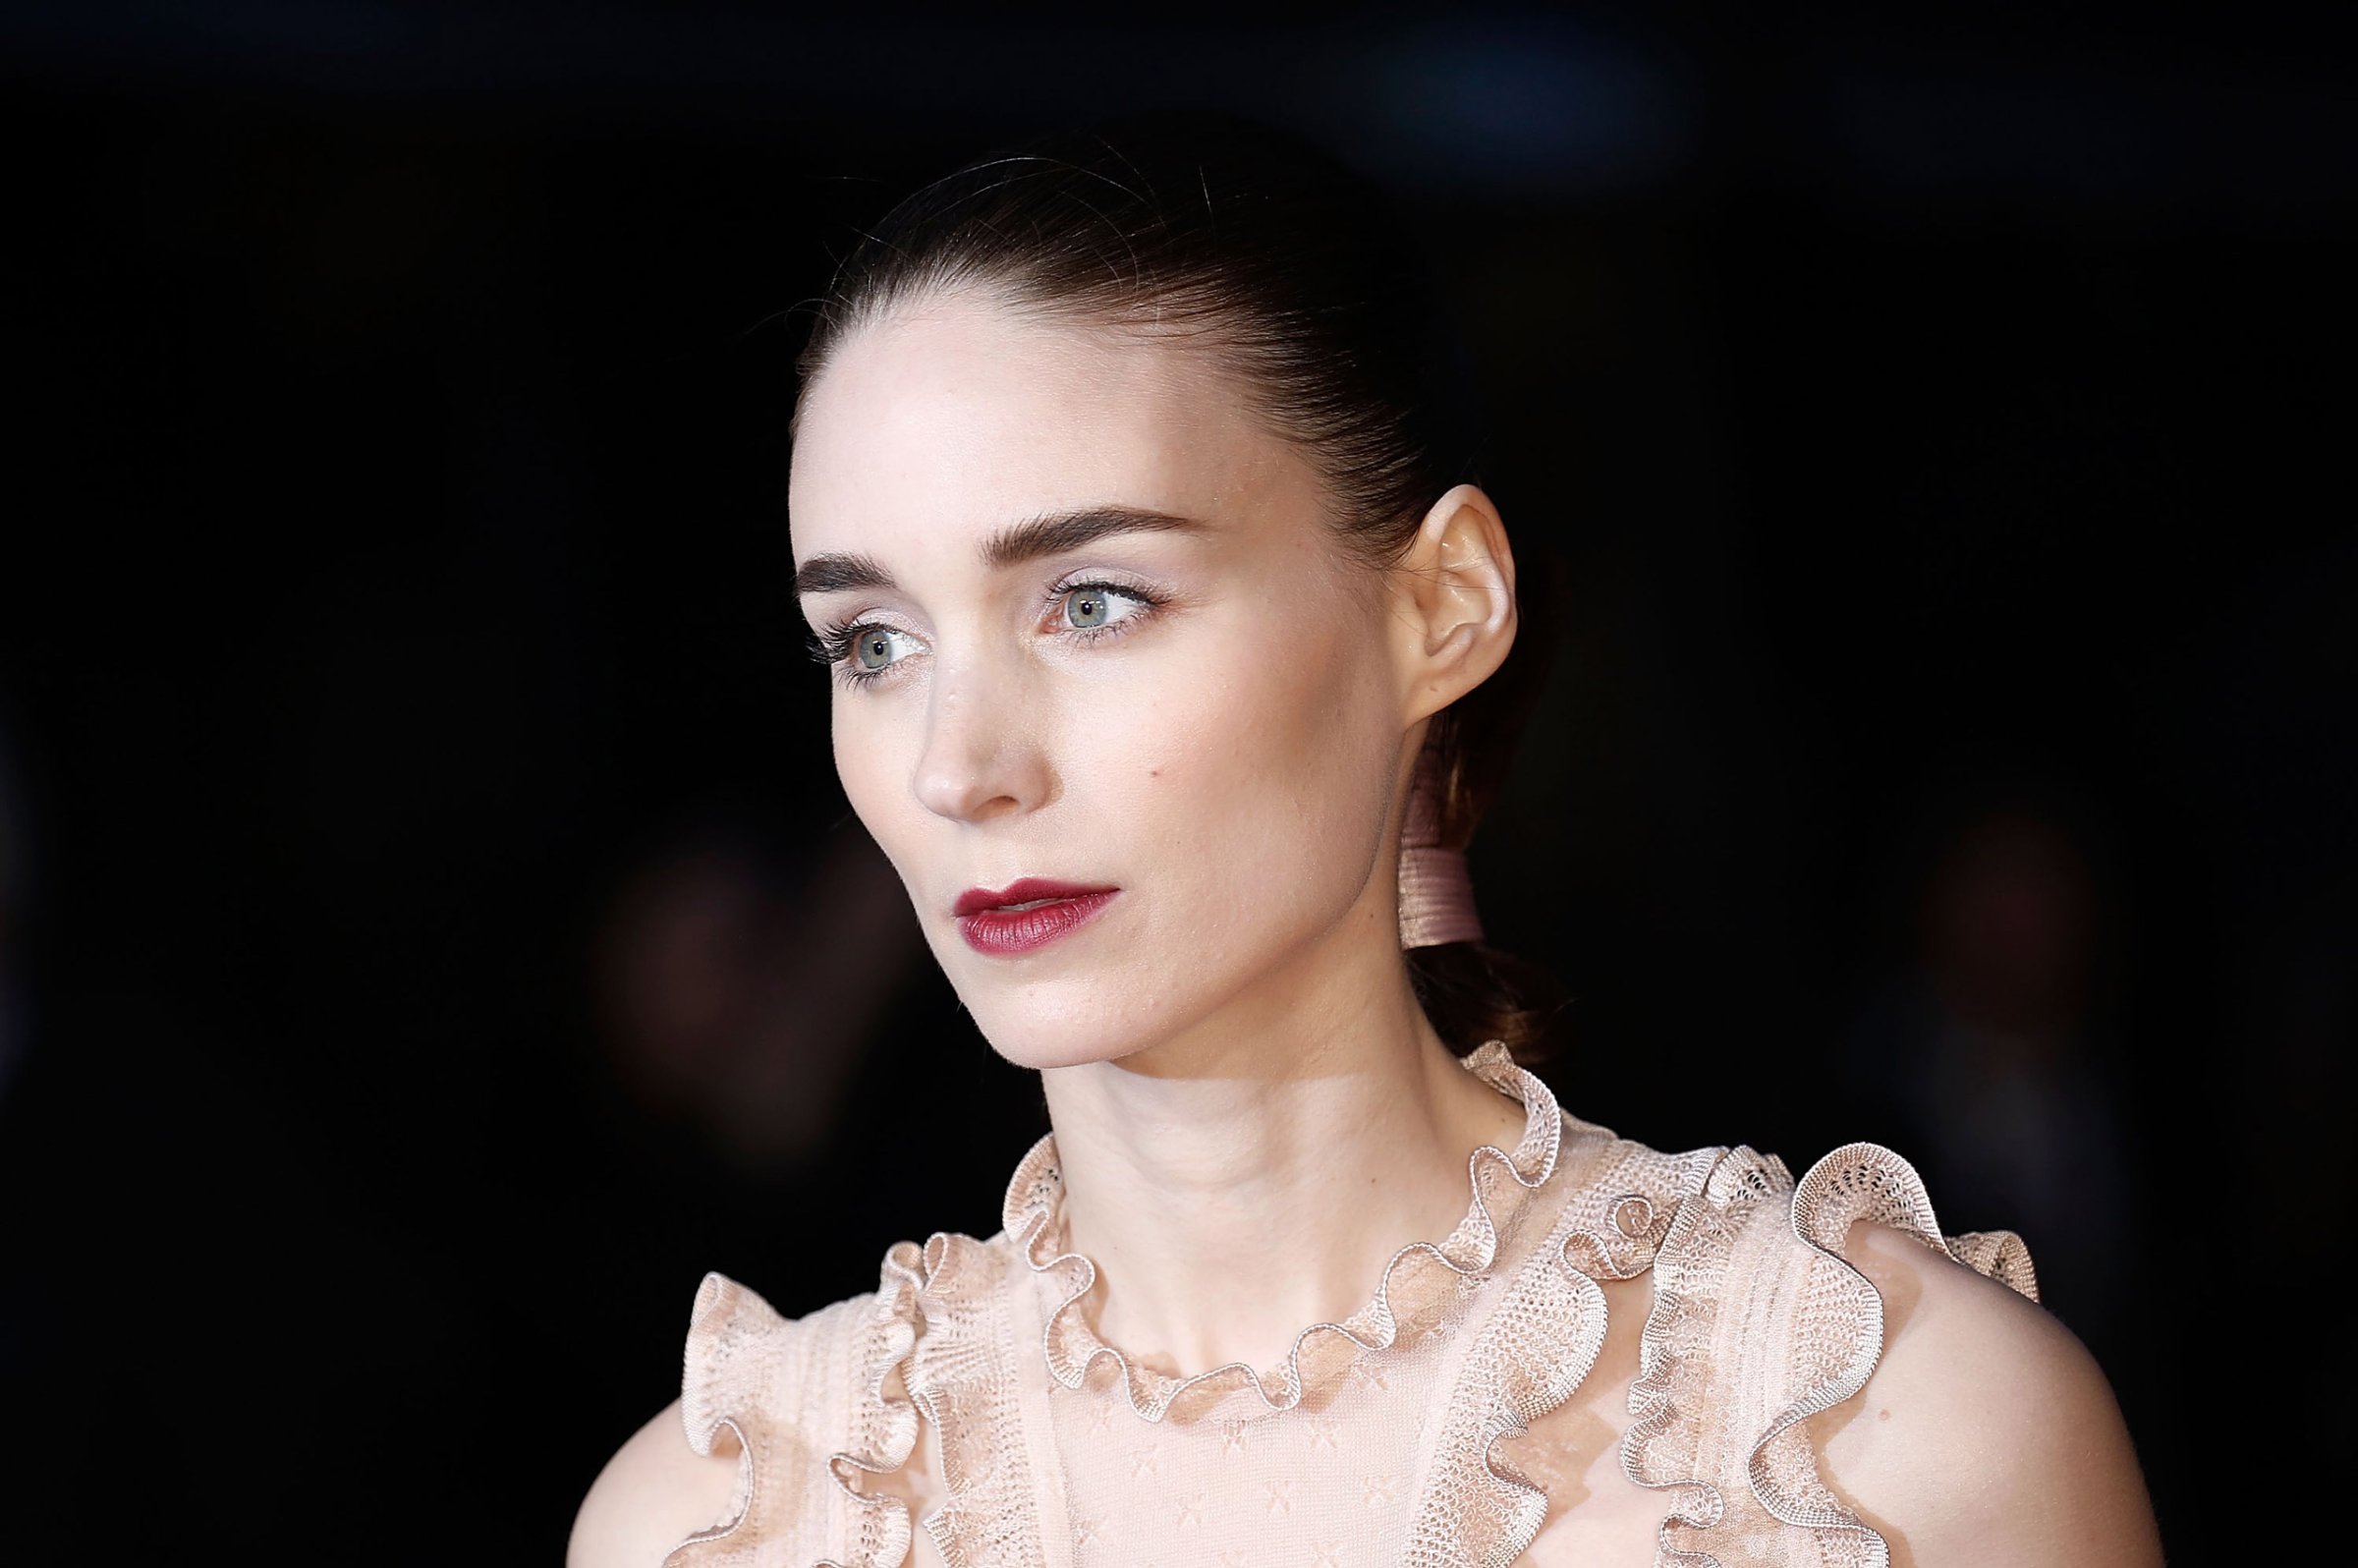 LONDON, ENGLAND - OCTOBER 14: Rooney Mara attends the "Carol" America Express Gala during the BFI London Film Festival, at the Odeon Leicester Square on October 14, 2015 in London, England. (Photo by John Phillips/Getty Images for BFI)